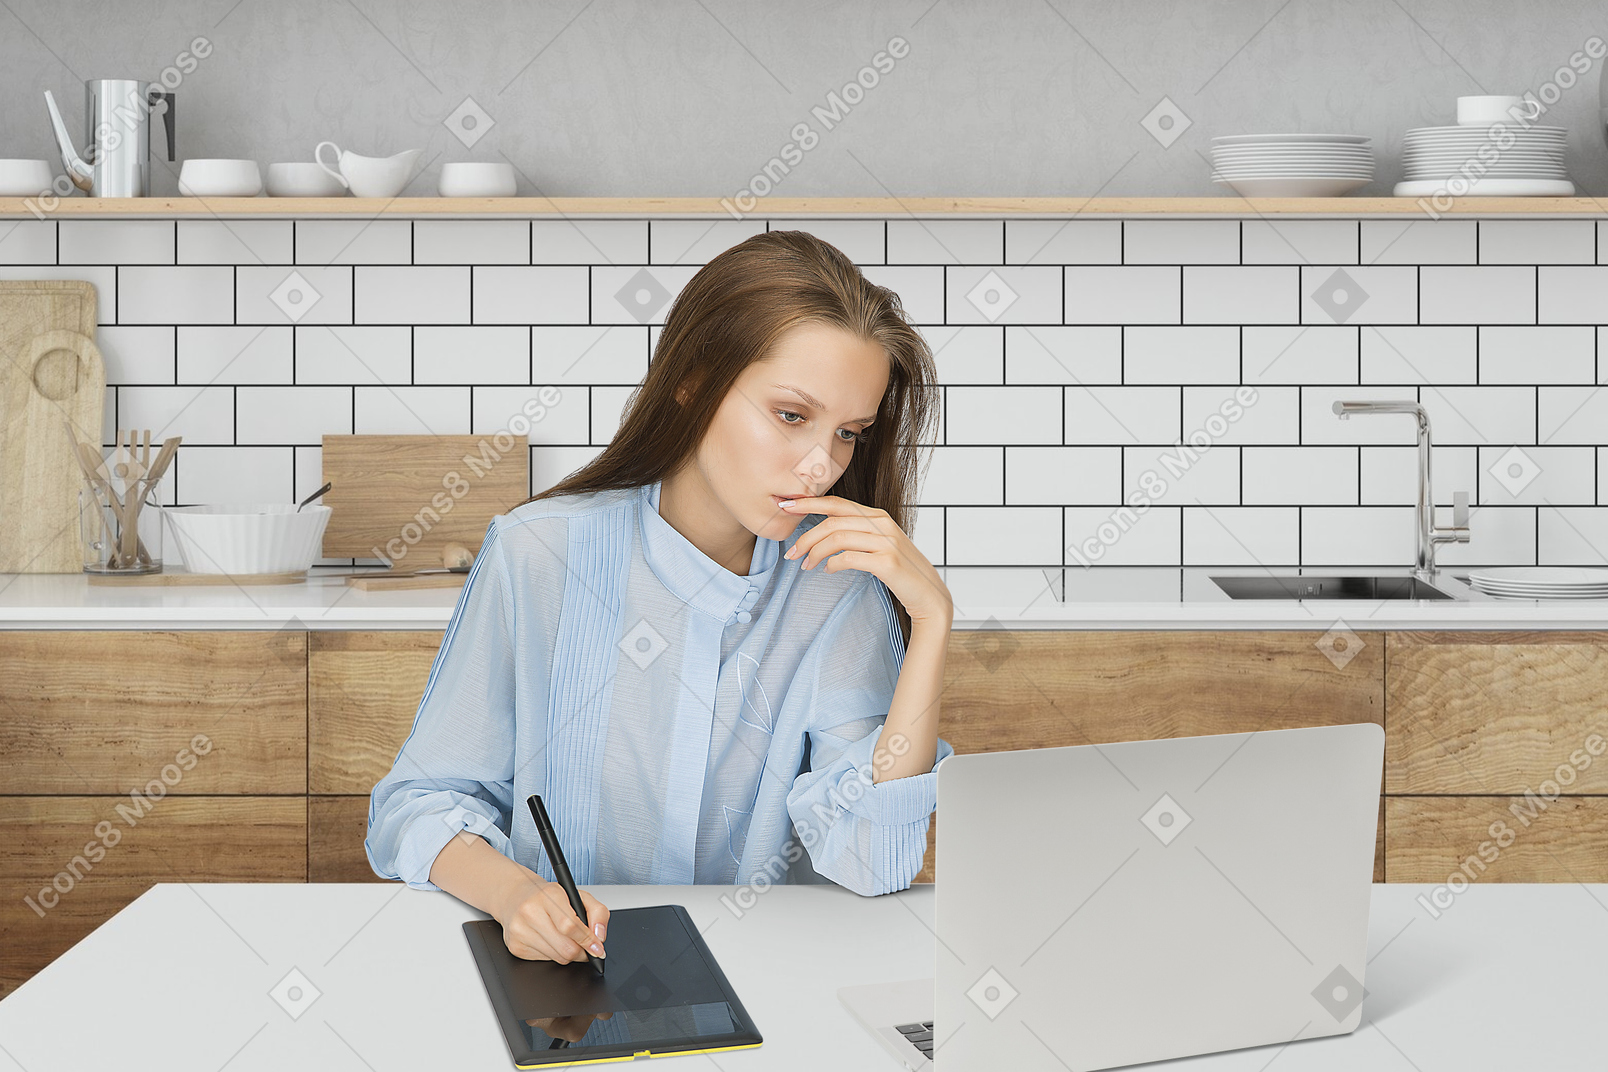 A woman sitting at a table using a laptop computer